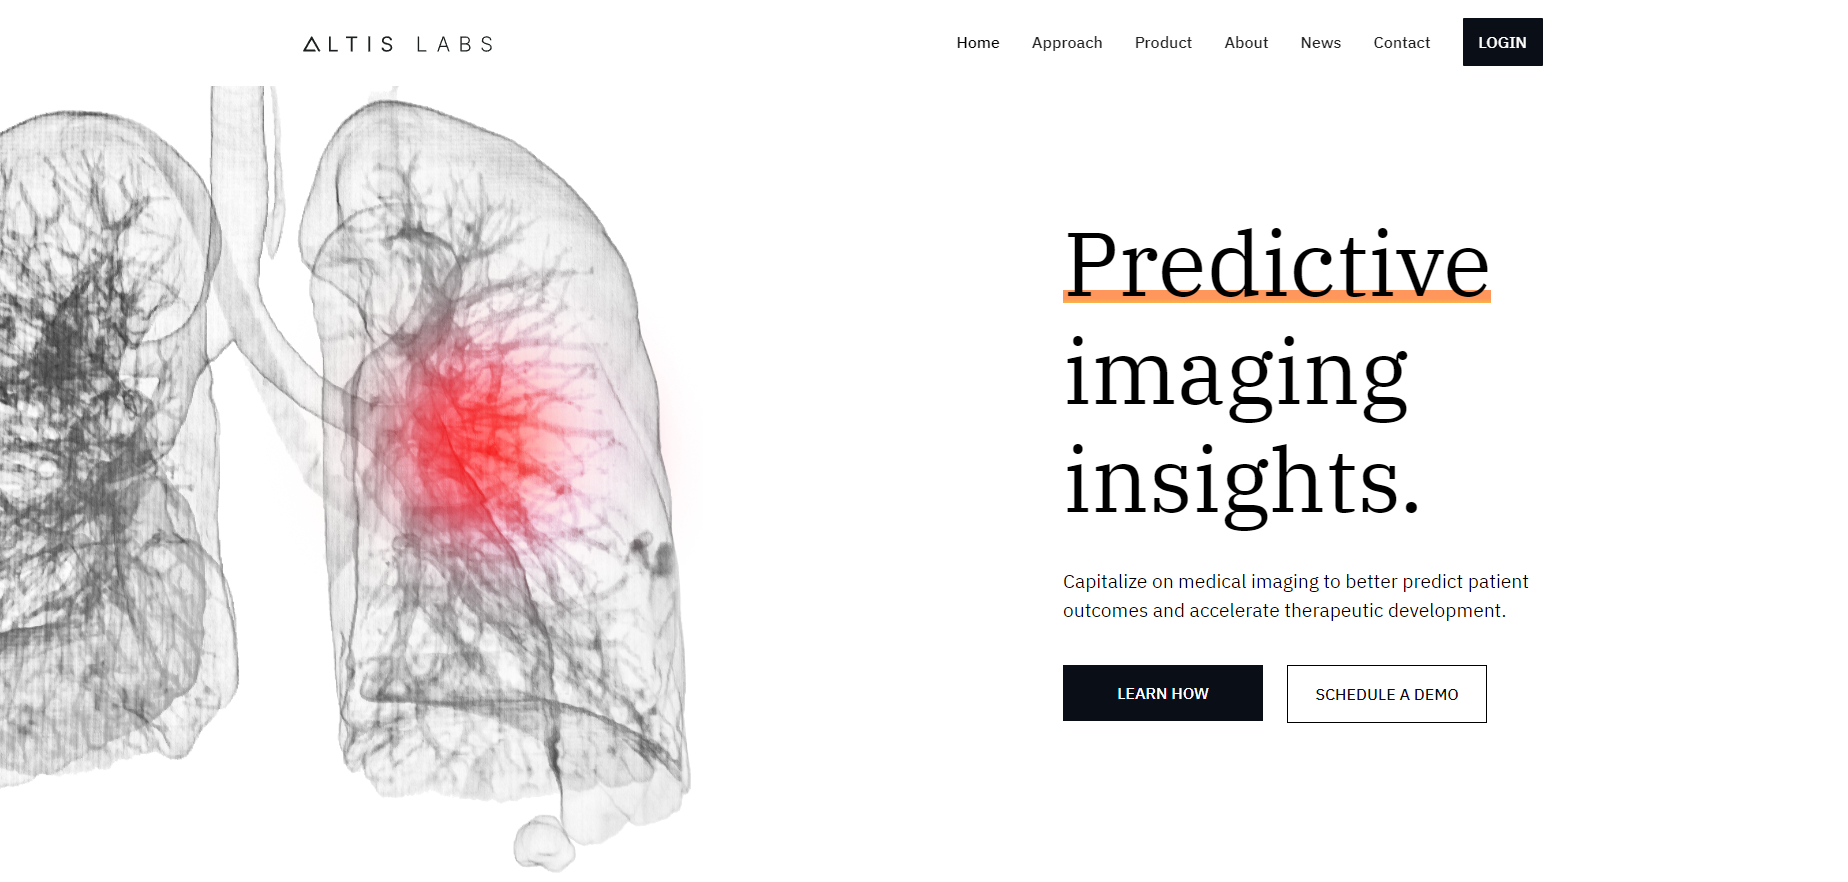 Altis Labs is the revolutionary AI-powered computational imaging company at the forefront of precision medicine.